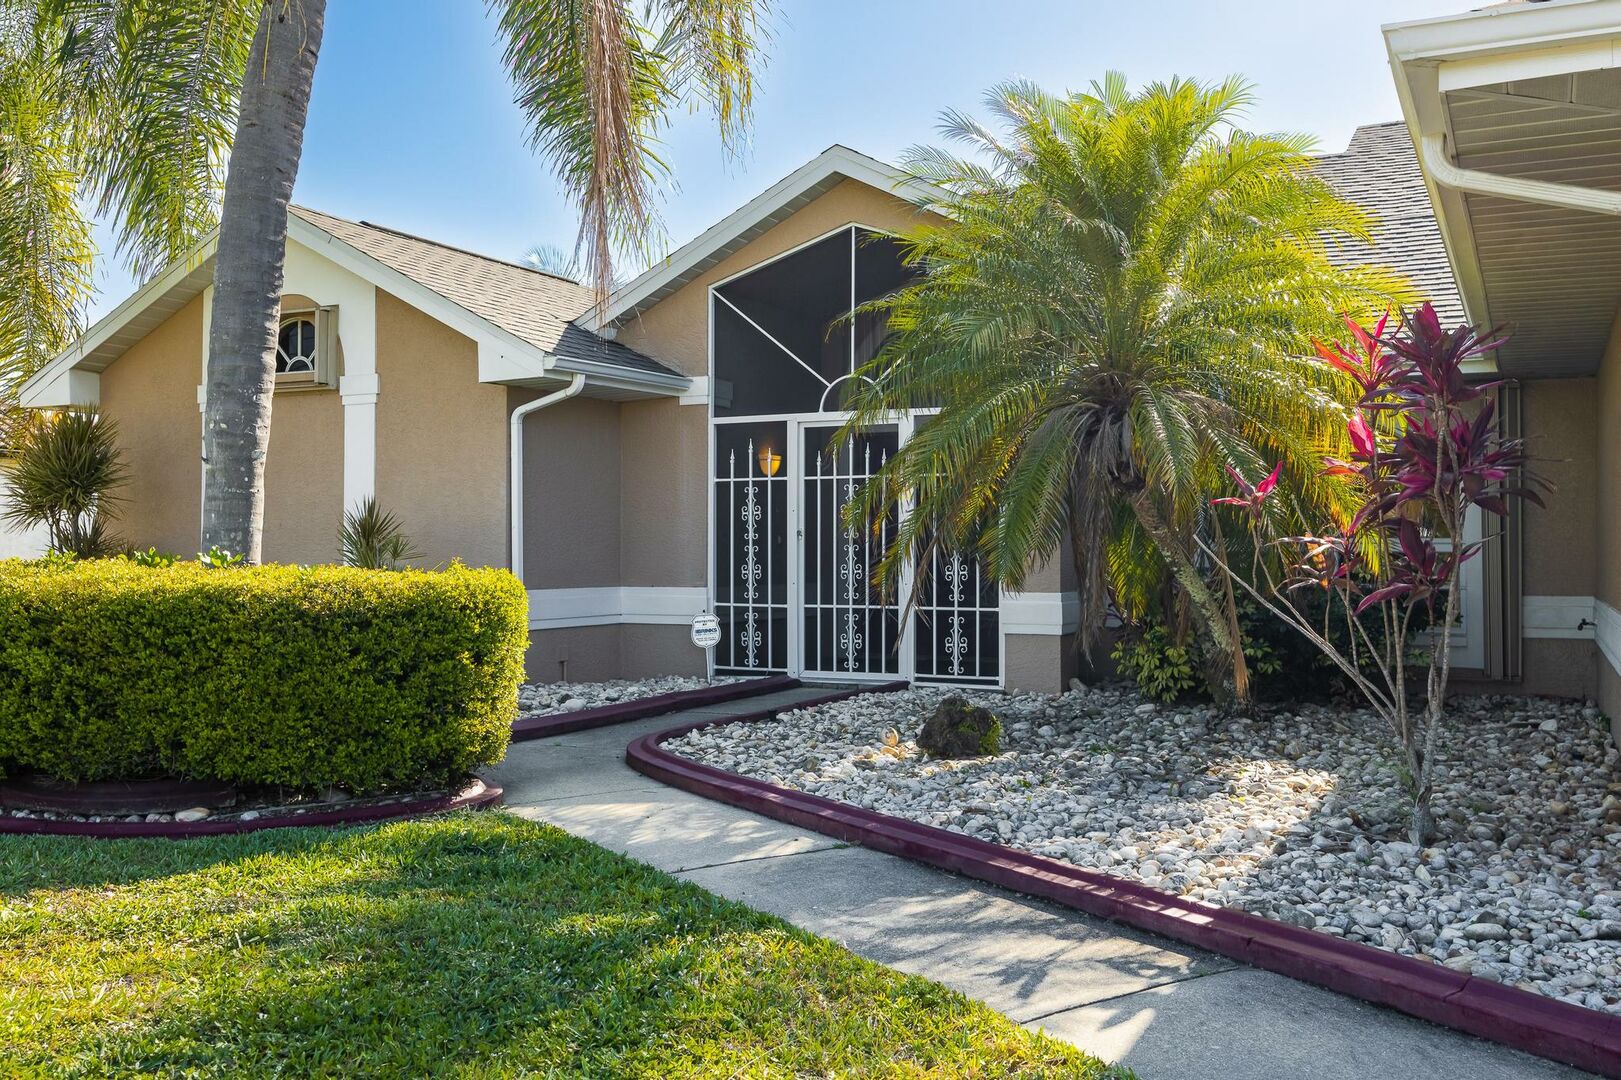 Cape coral vacation rental